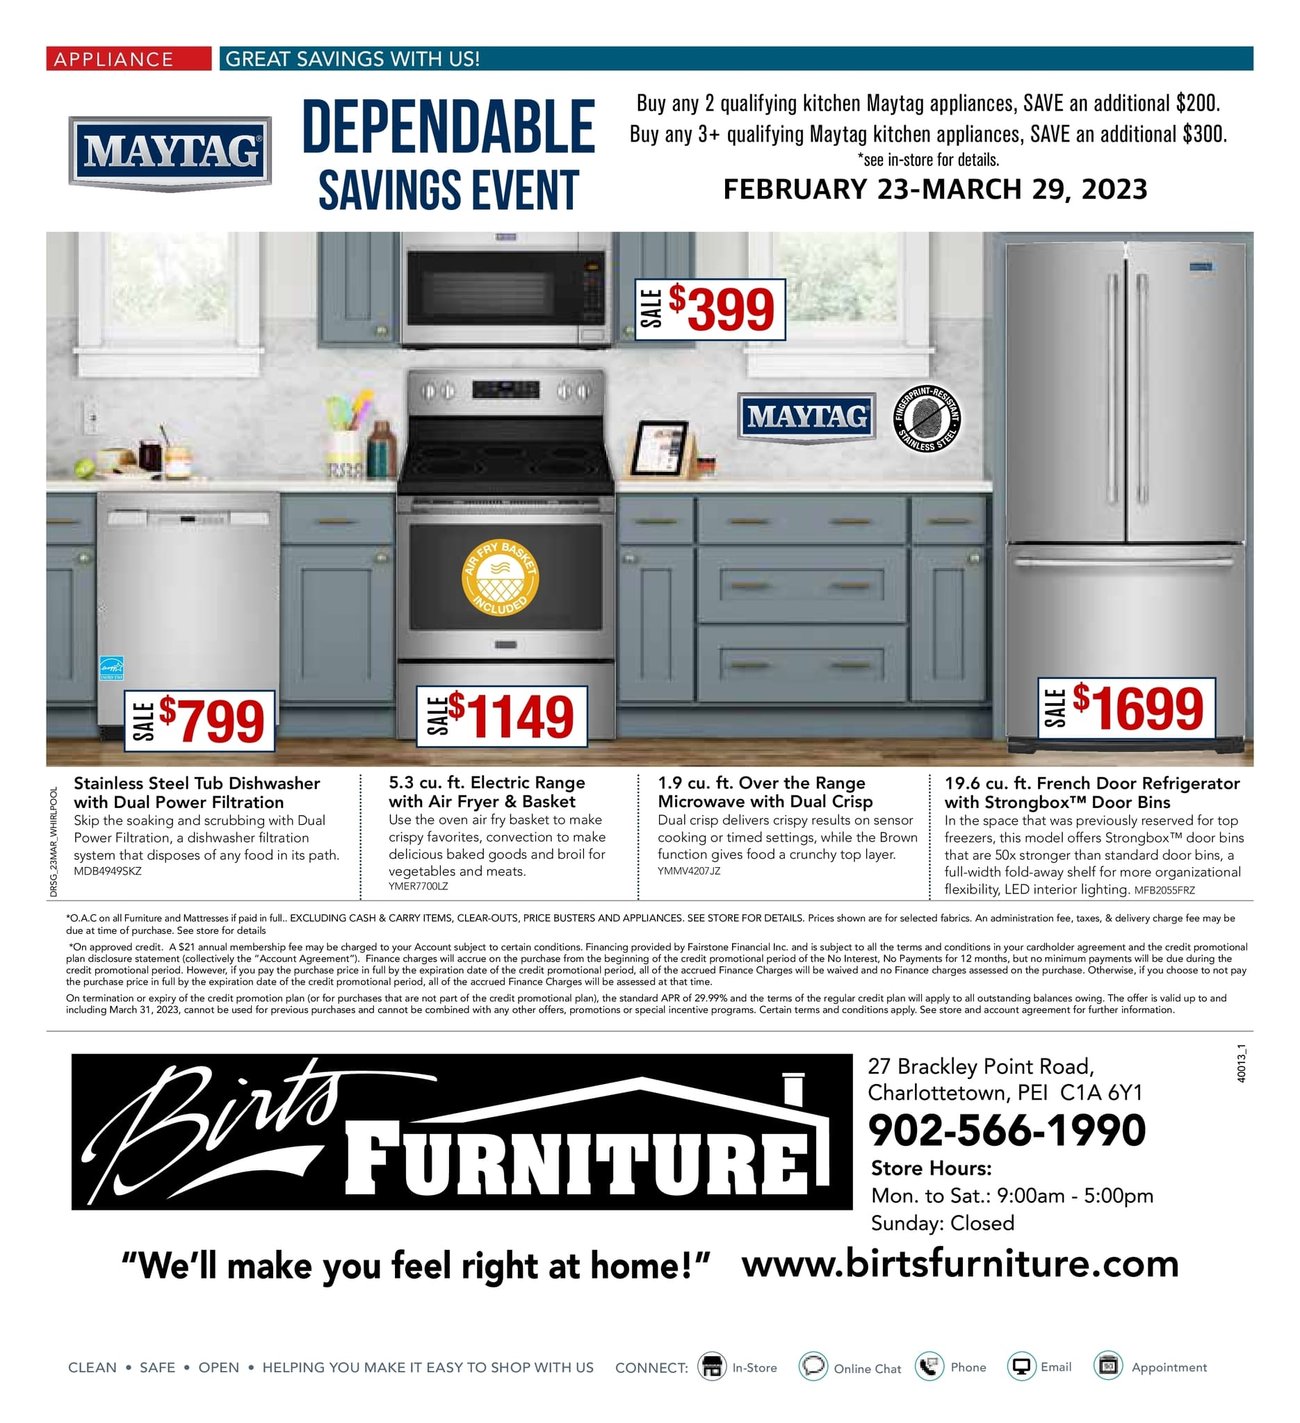 Birts Furniture - Monthly Savings - Page 8